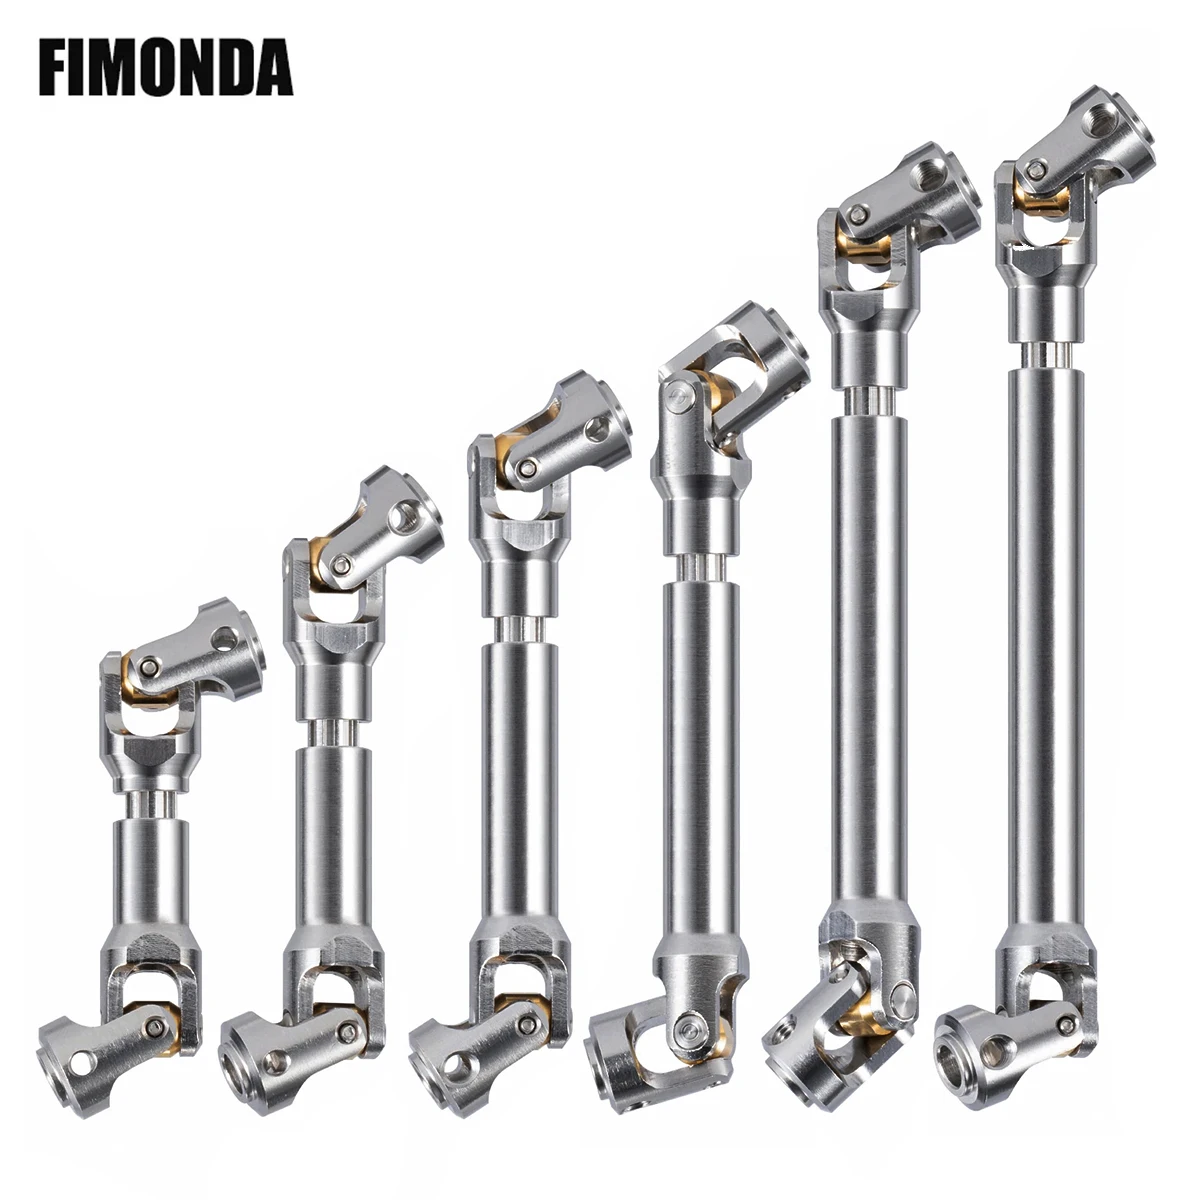 Stainless Steel Drive Shaft 5mm Universal Joint Driveshaft for 1/10 RC Rigs Crawler SCX10 Pro TRX4 High Trail TF2 VS4-10 CC02